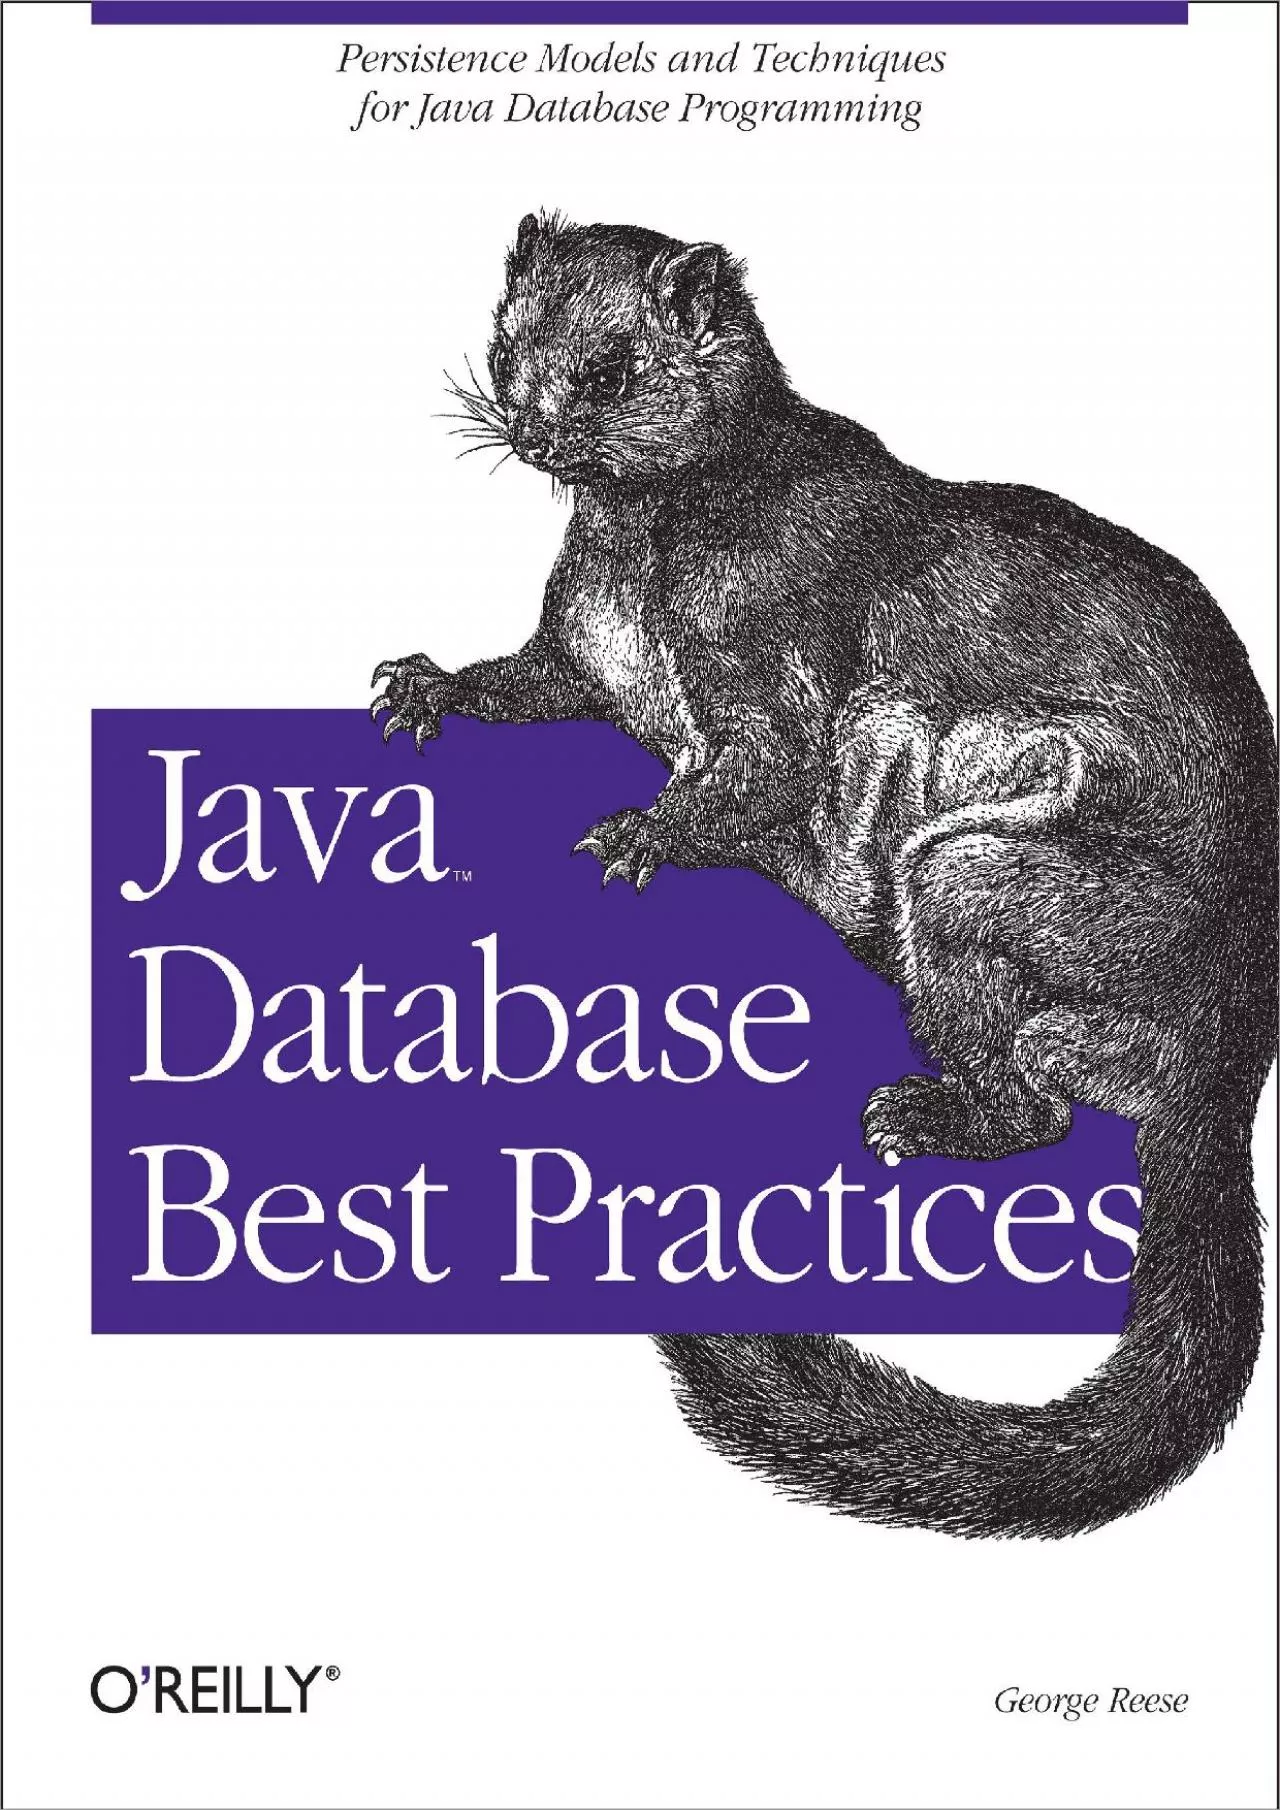 [eBOOK]-Java Database Best Practices: Persistence Models and Techniques for Java Database